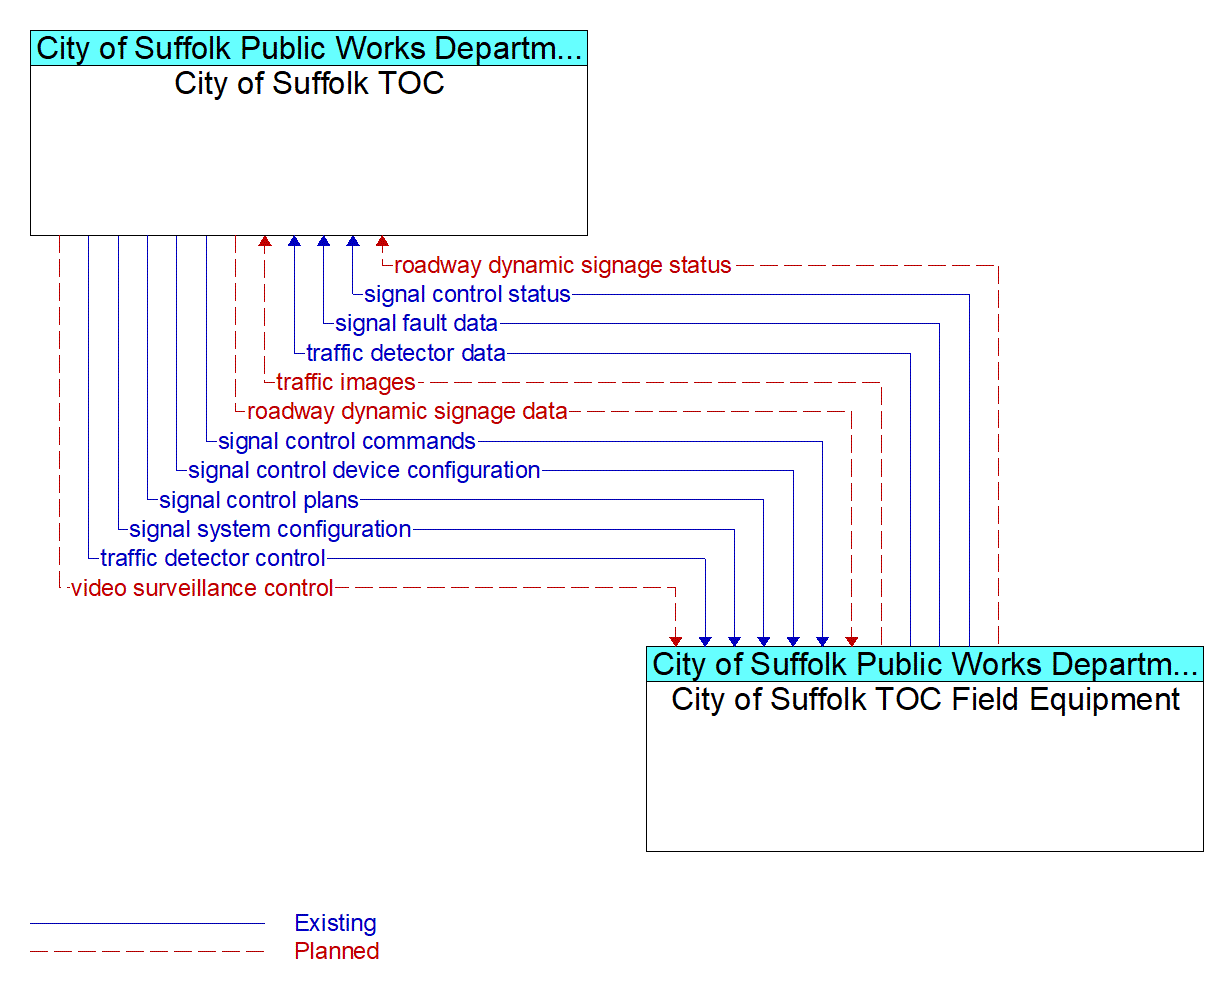 Architecture Flow Diagram: City of Suffolk TOC Field Equipment <--> City of Suffolk TOC